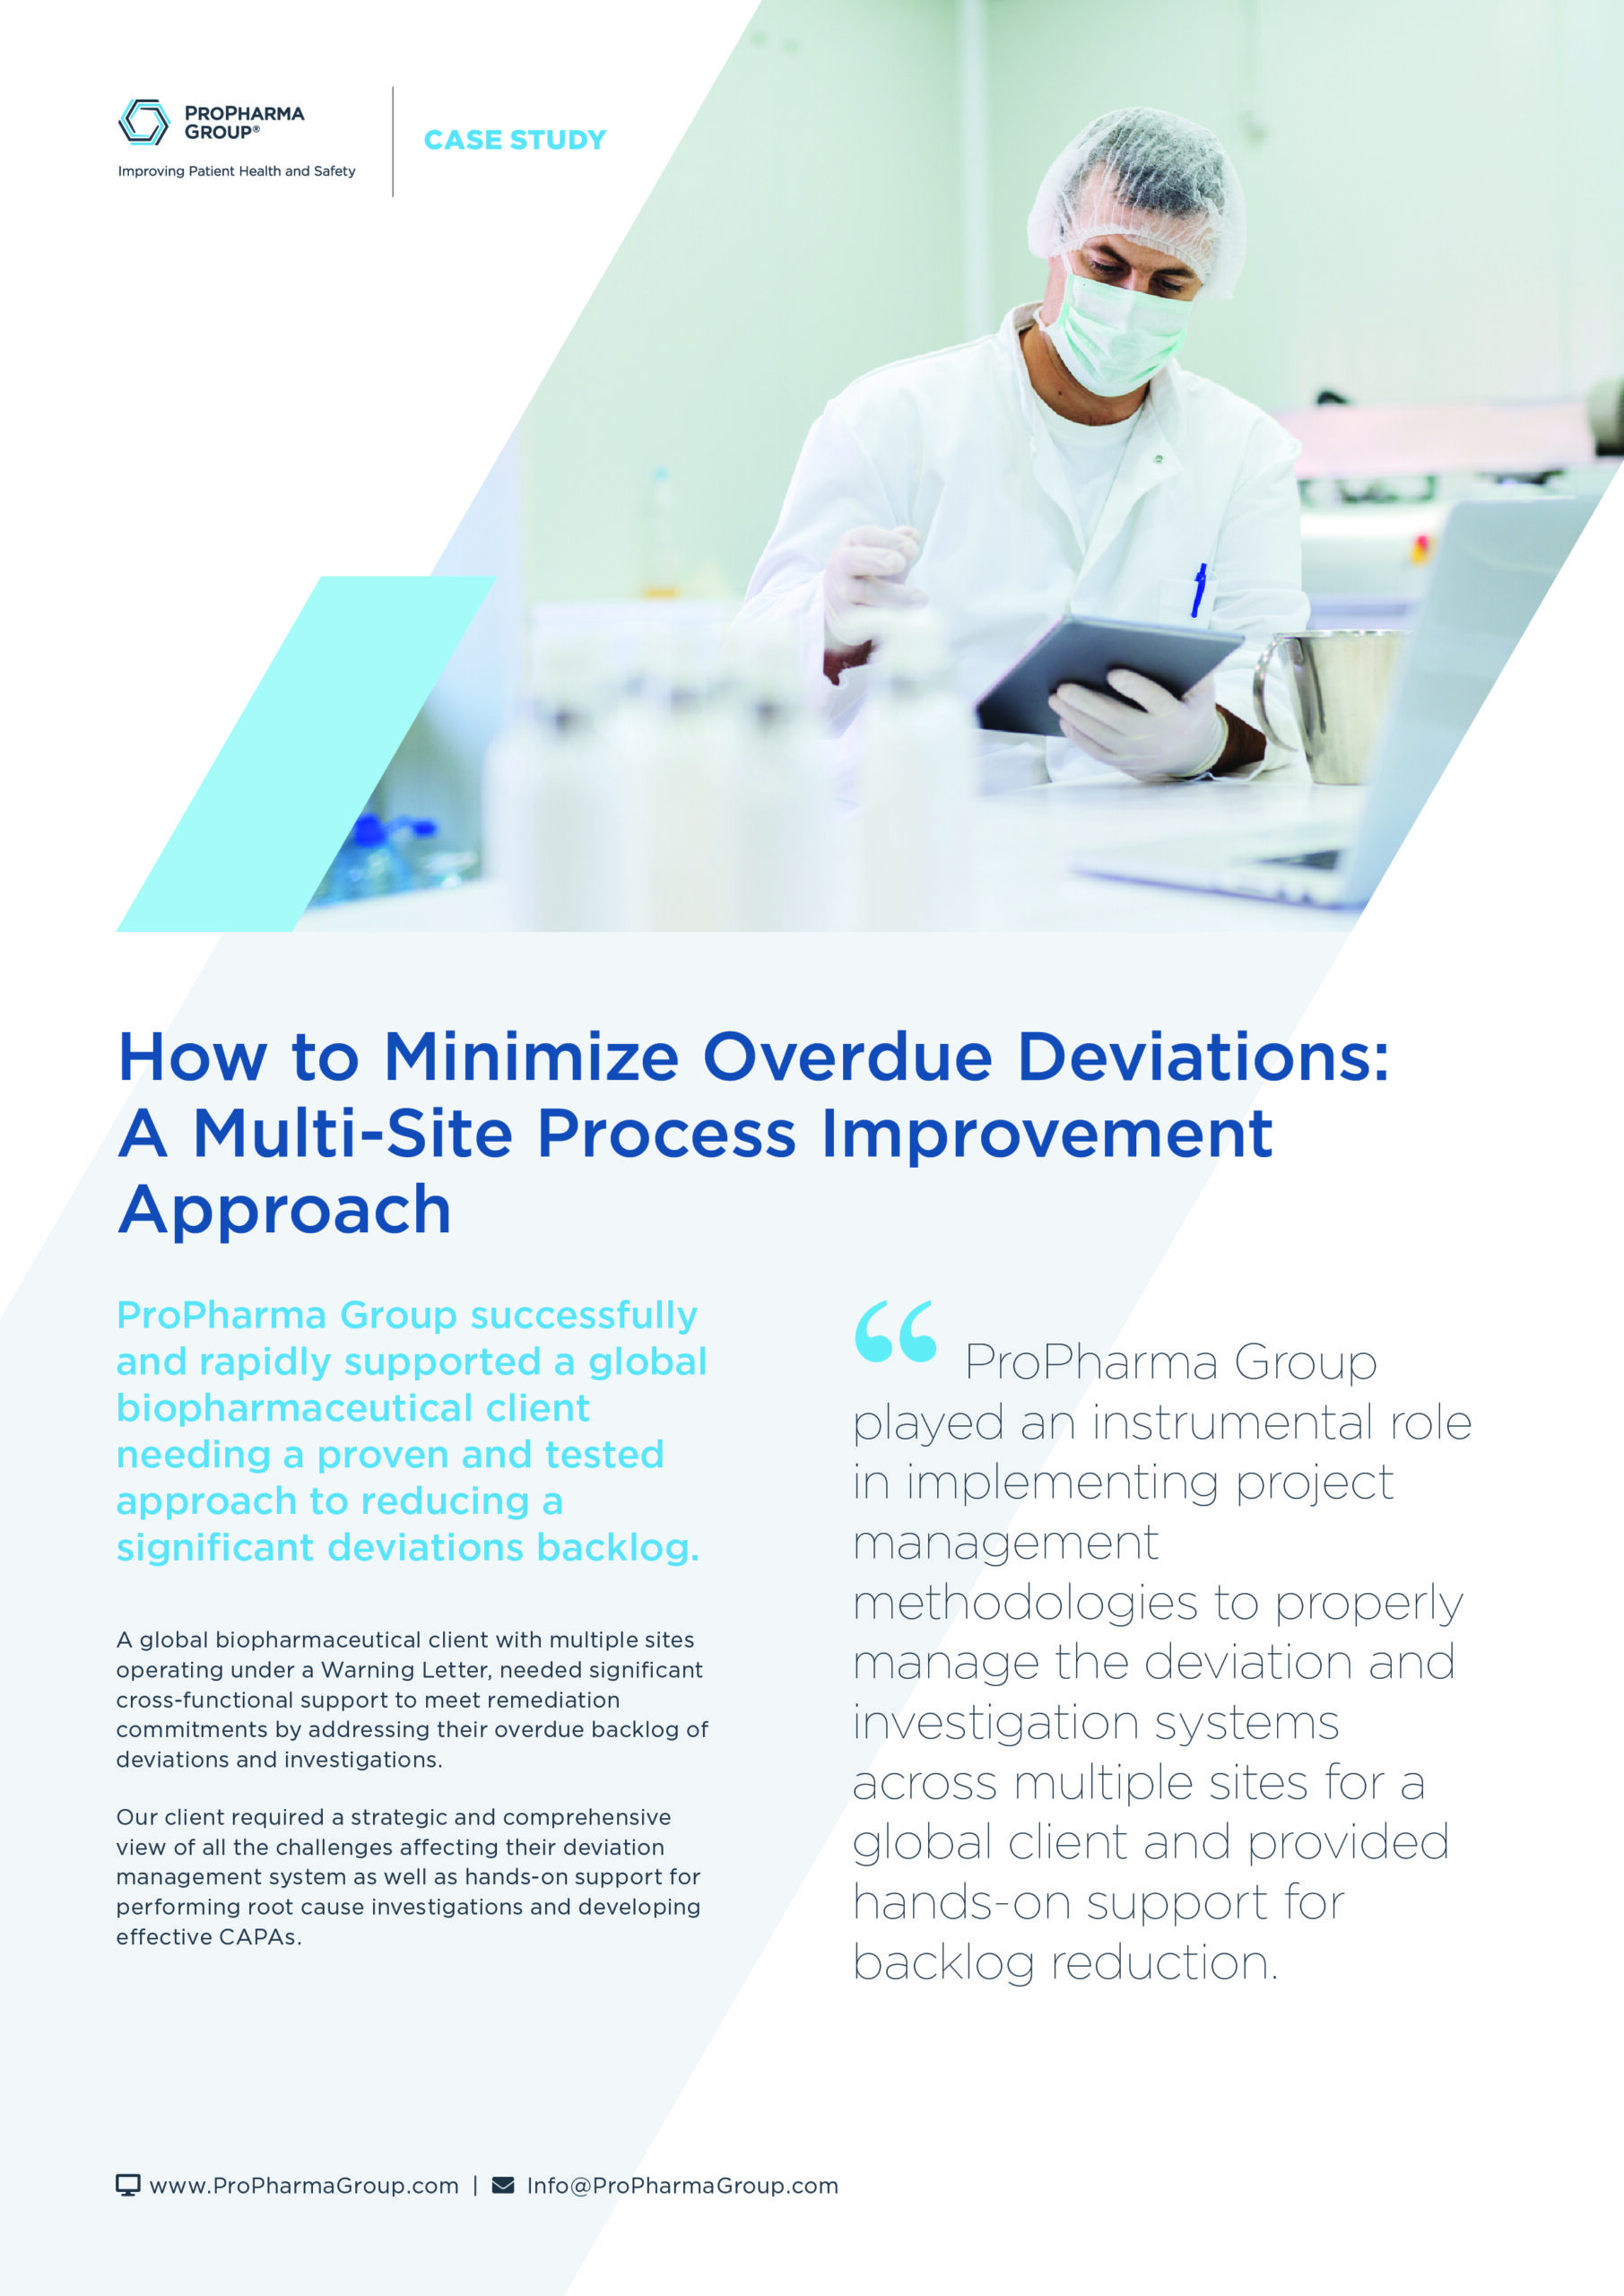 How to Minimize Overdue Deviations: A Multi-Site Process Improvement Approach